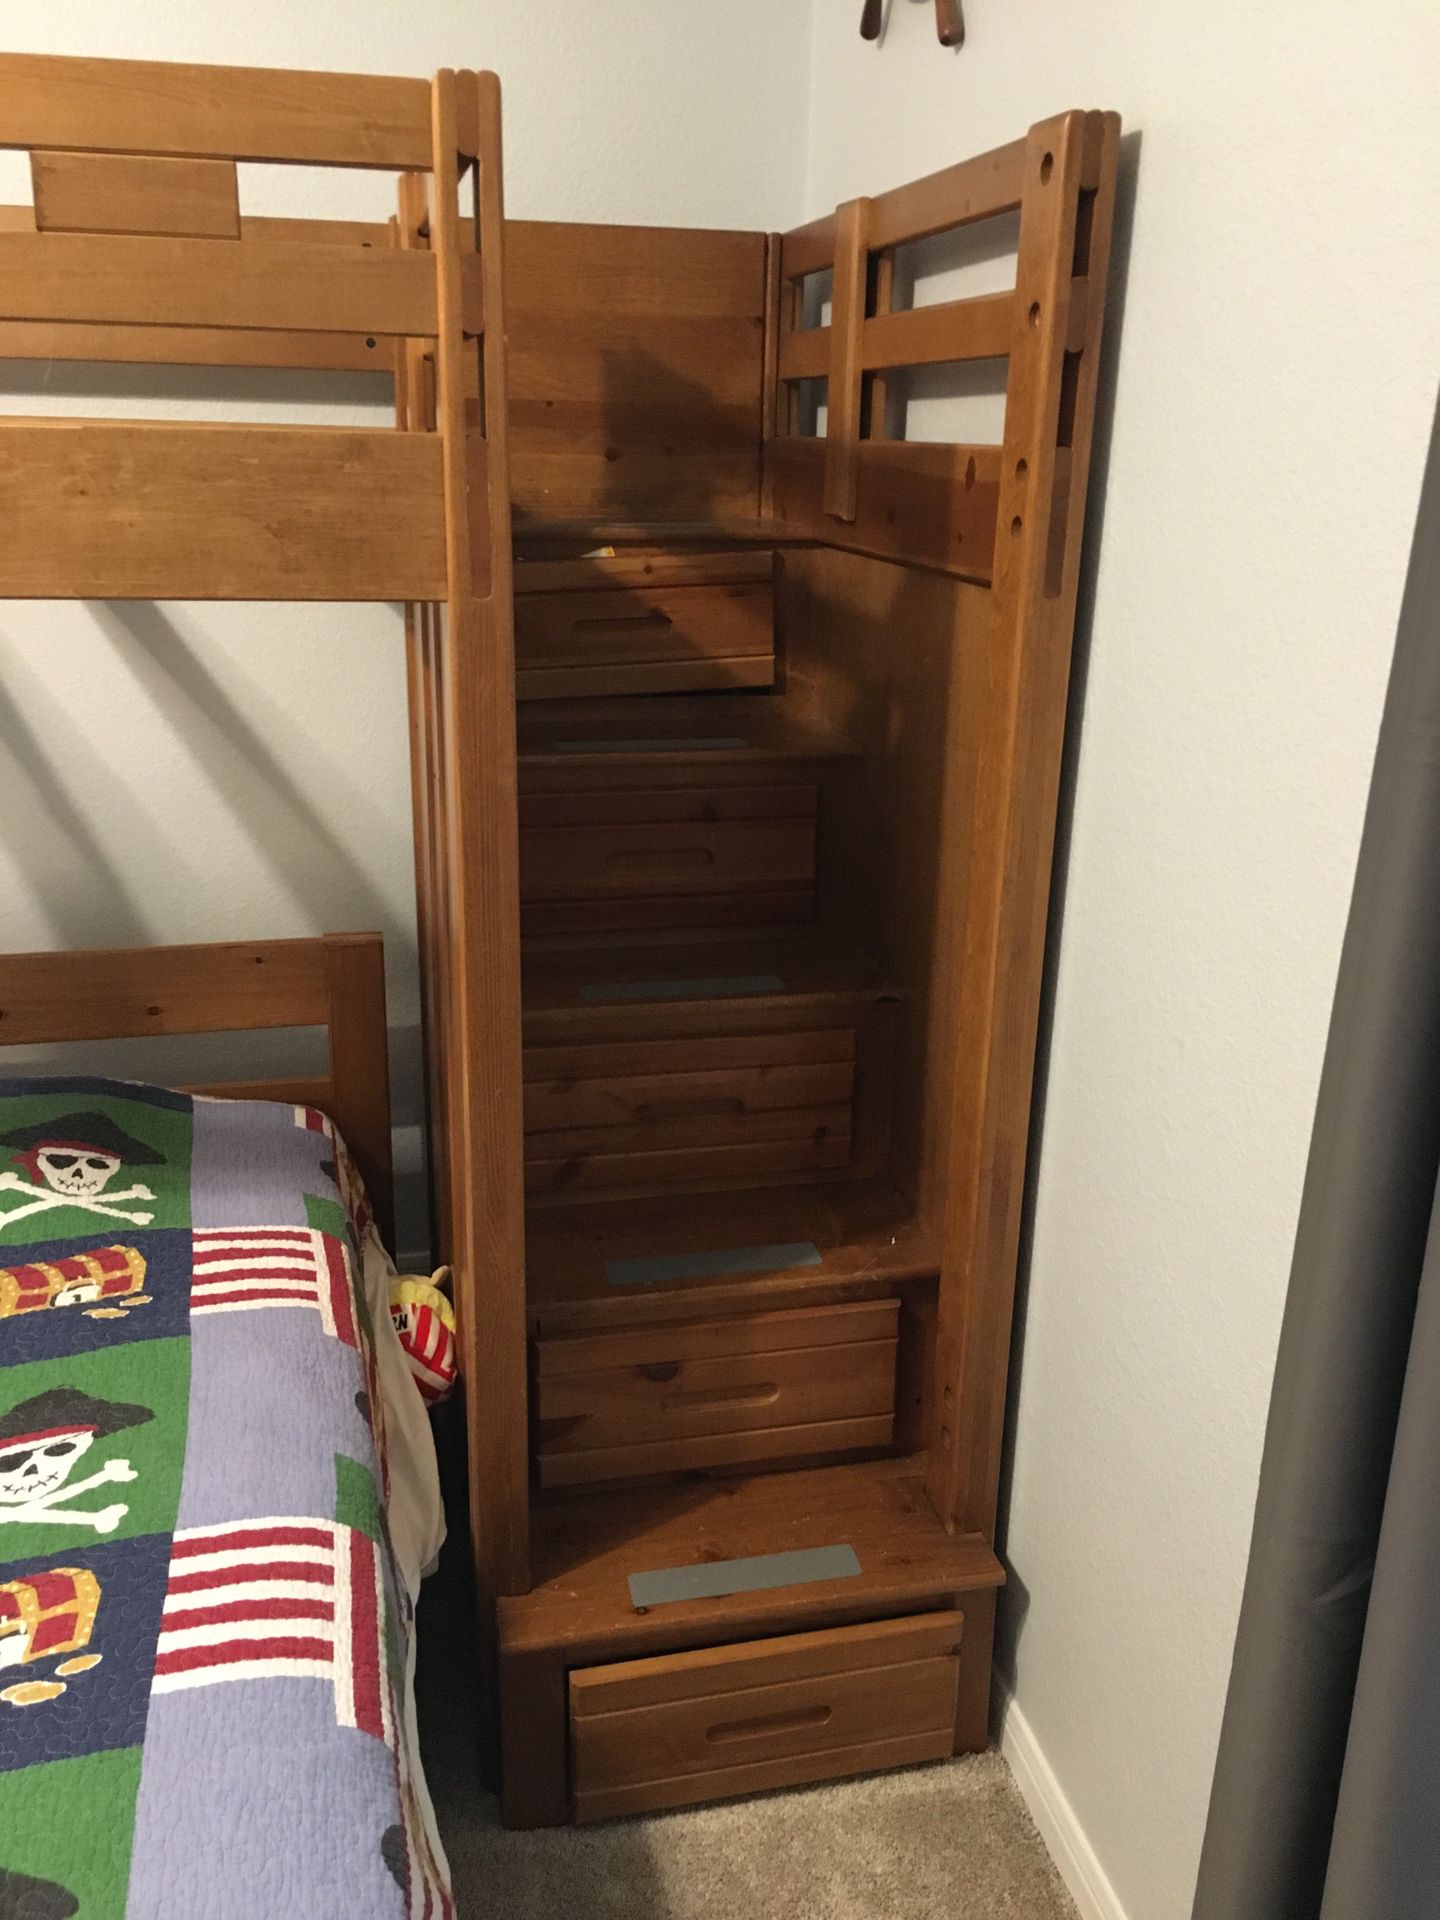 Bunk bed (Full bottom and Twin top) without mattresses